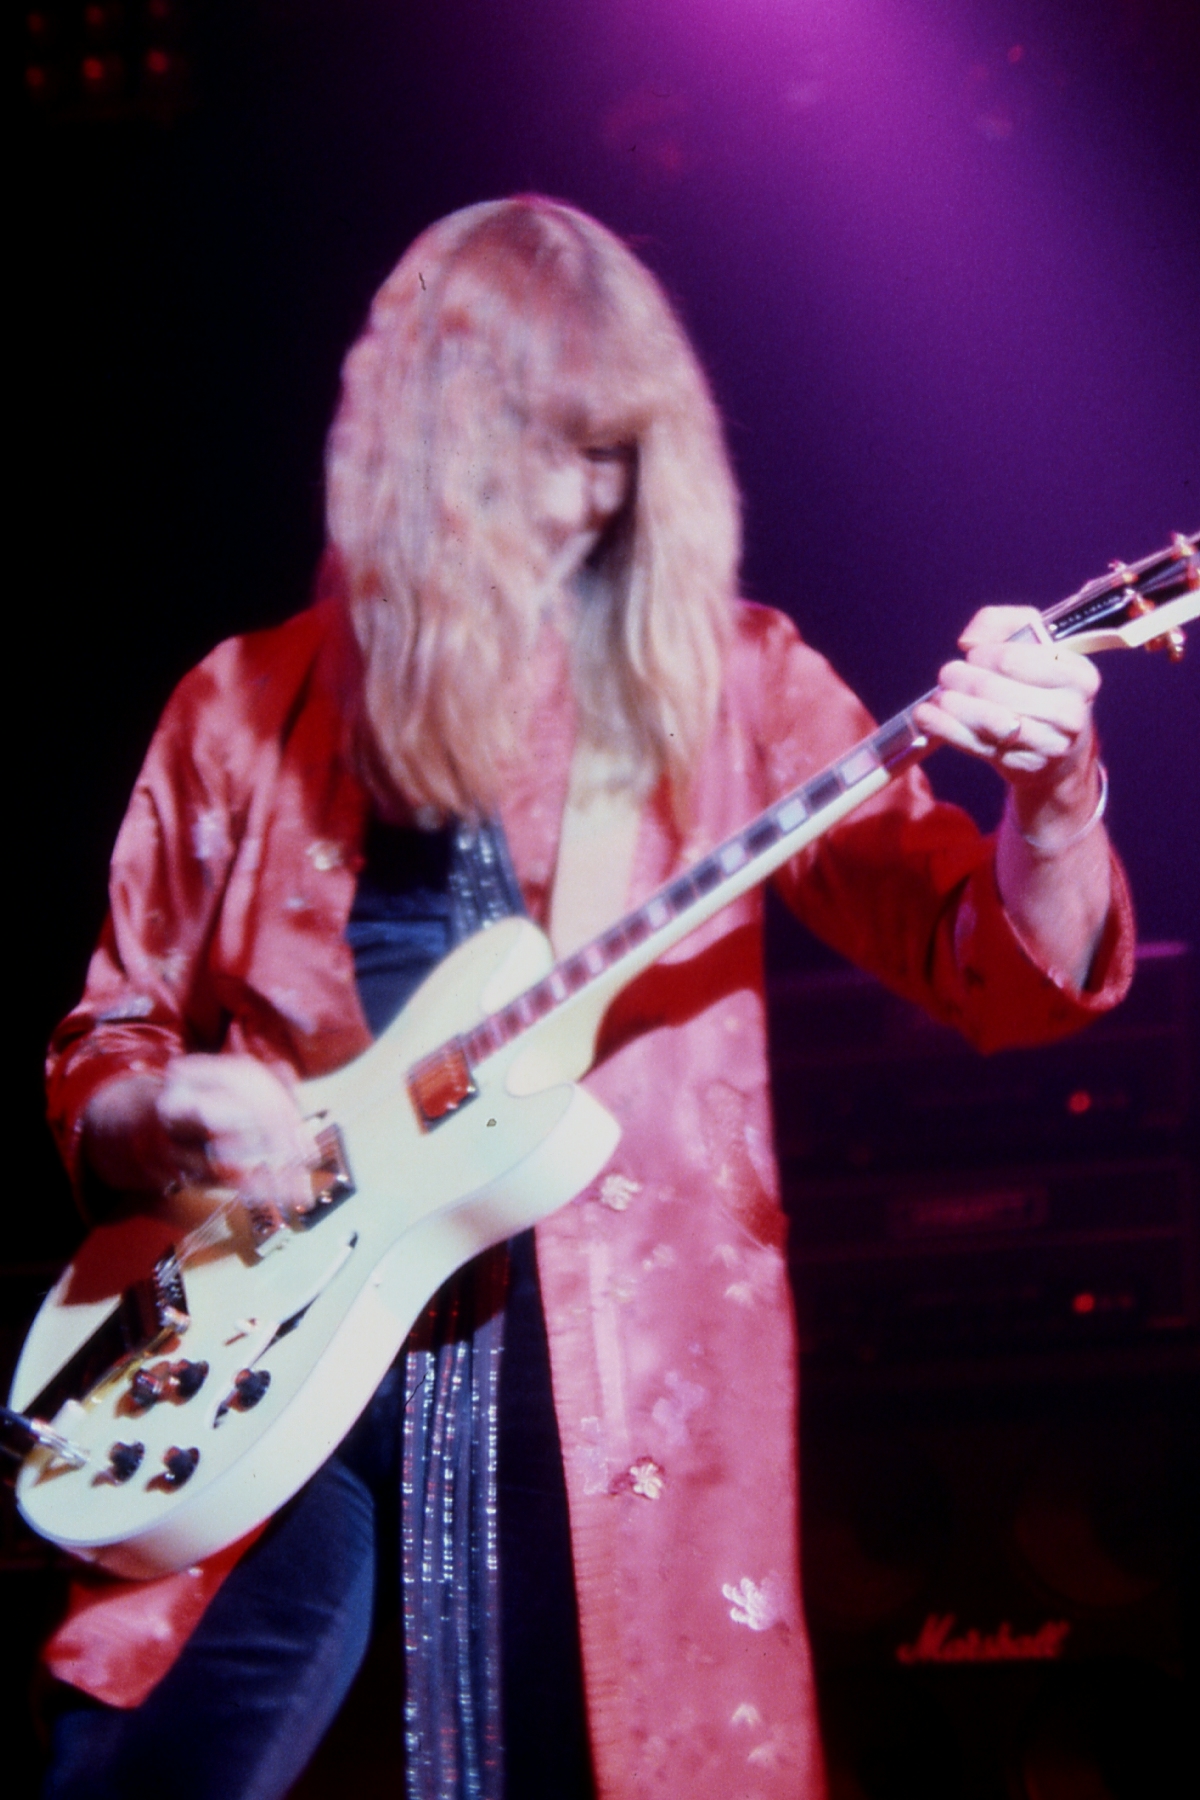 Rush 'A Farewell to Kings' Tour Pictures - Dane County Memorial Coliseum - Madison, Wisconsin - 01/29/1978